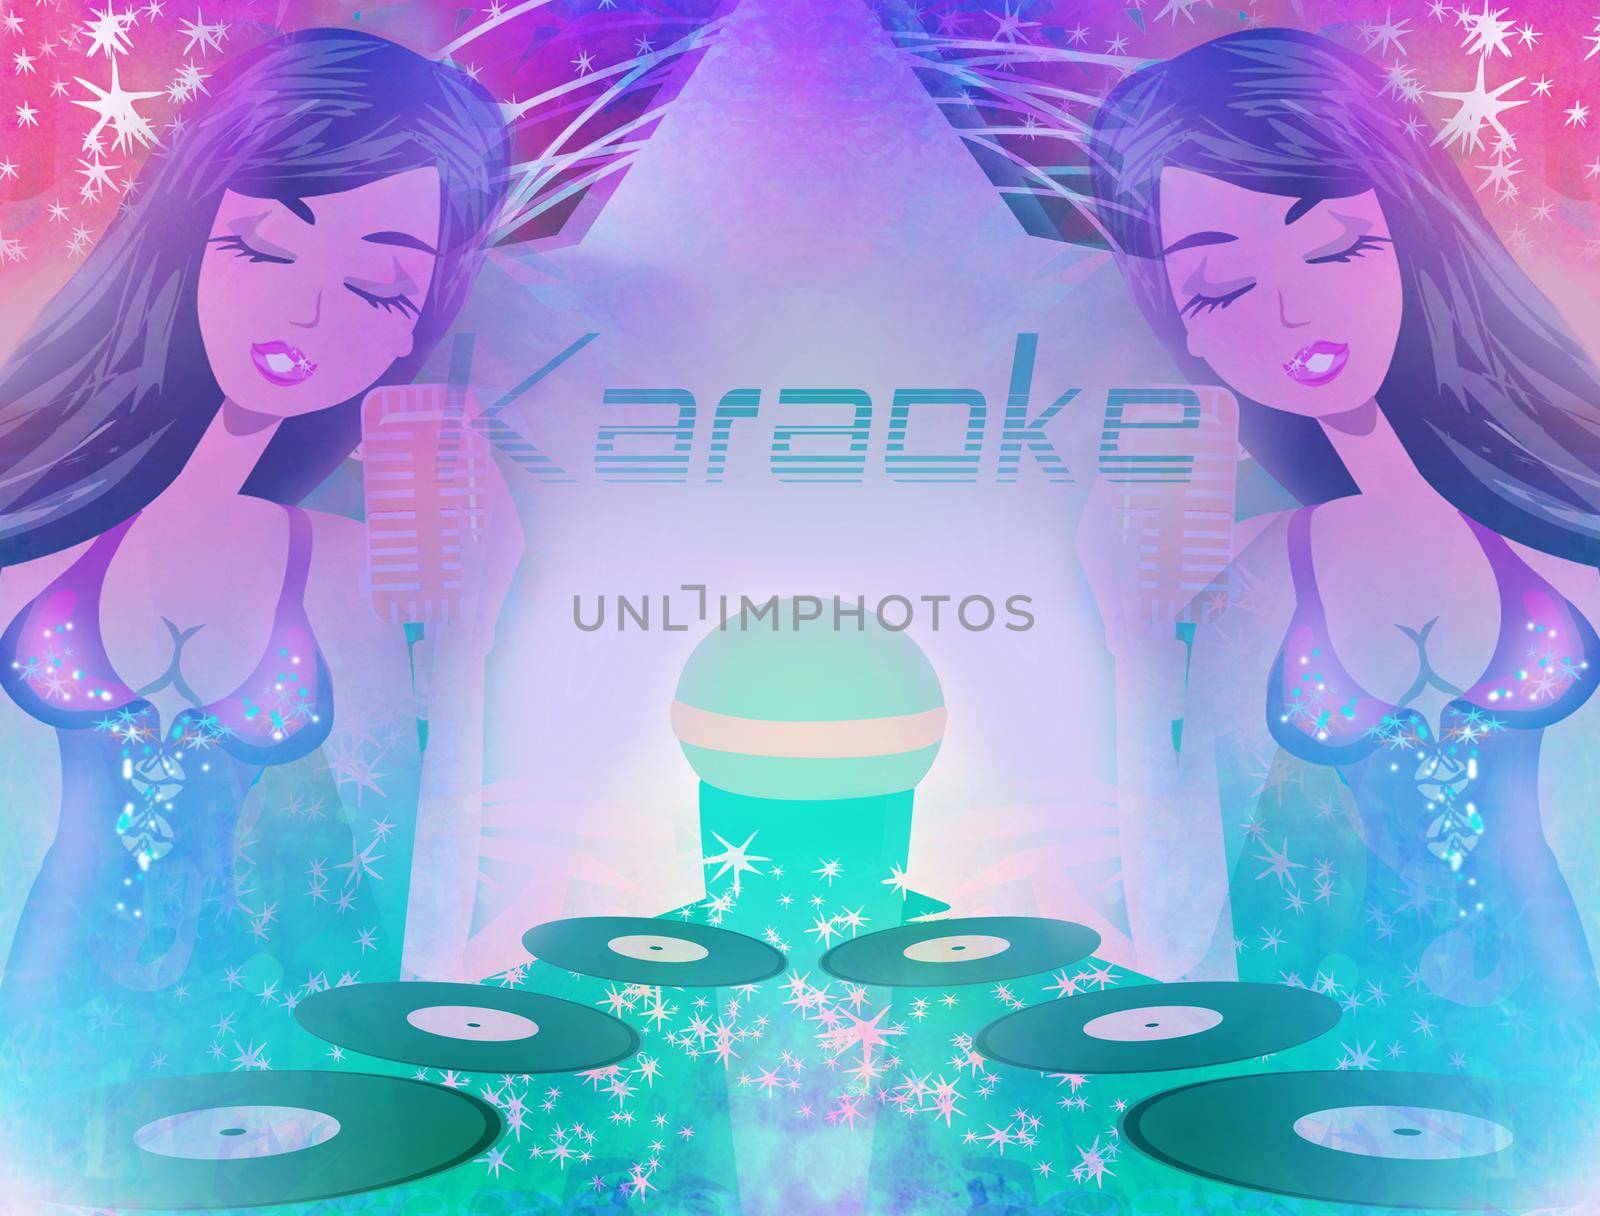 Karaoke night, abstract illustration with microphone and singer by JackyBrown